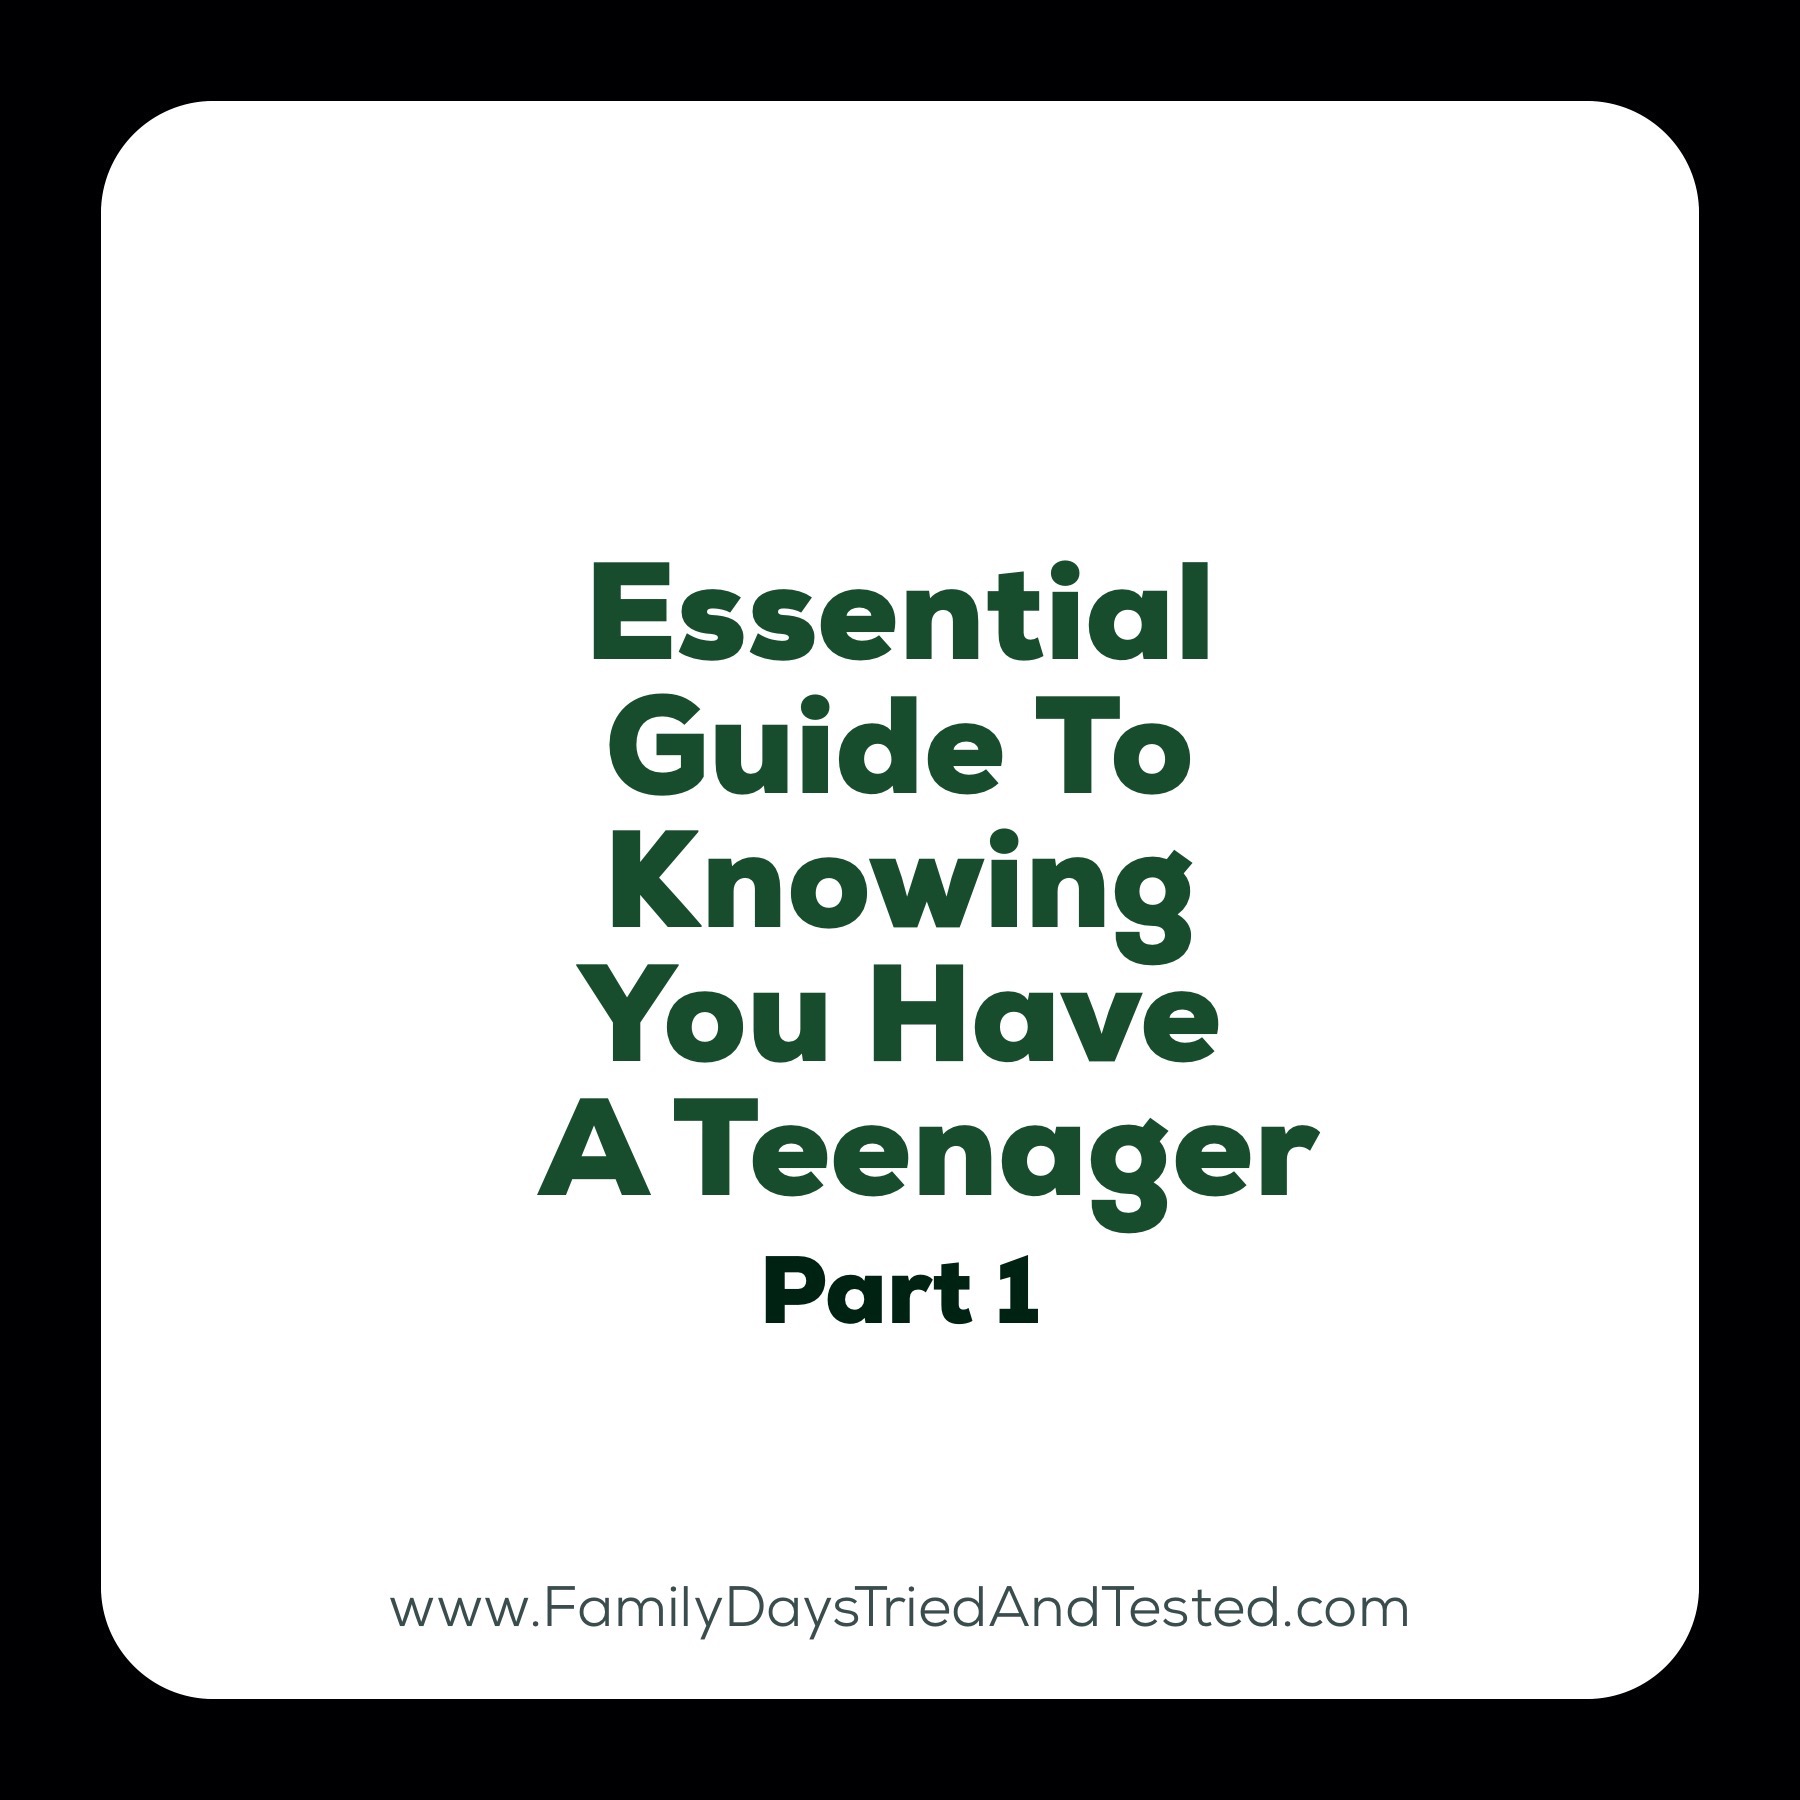 The Essential Guide To Knowing You Have A Teenager Part-1